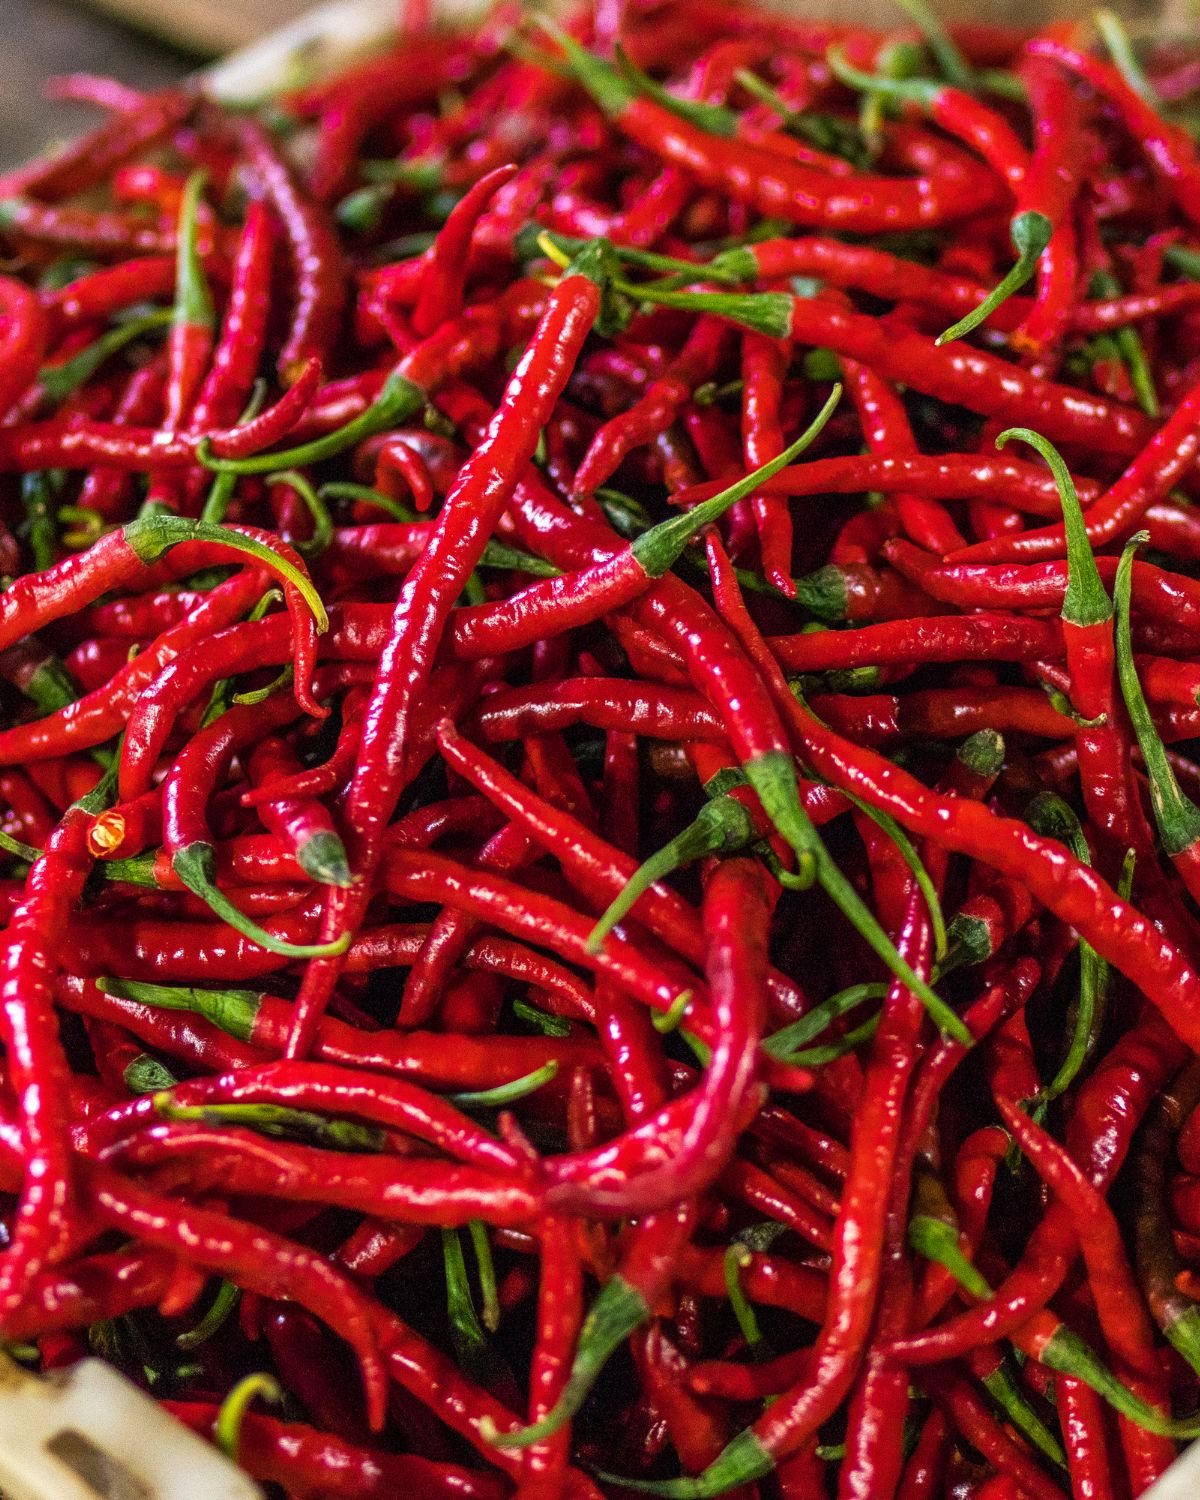 Many fresh red chilies.